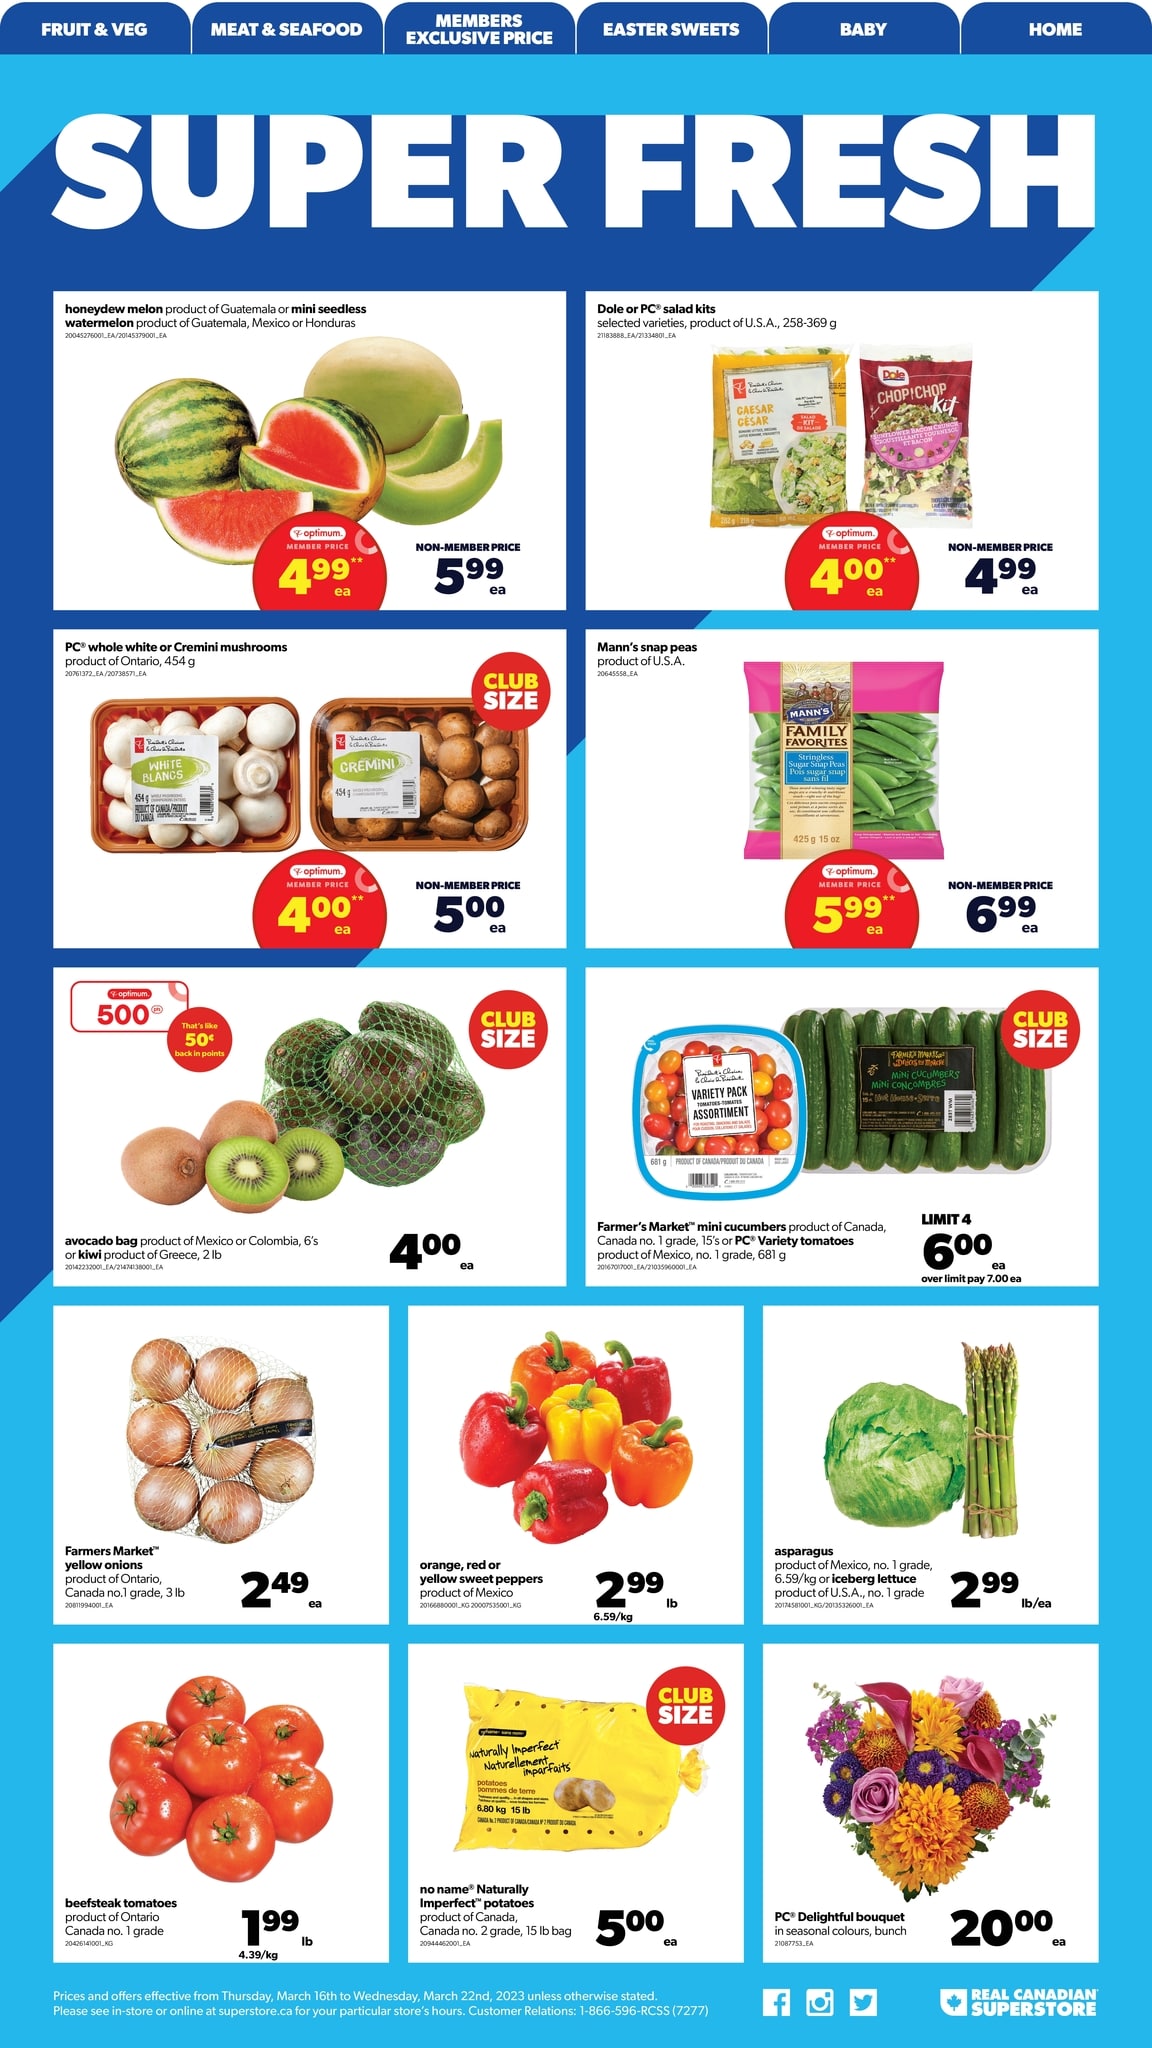 Real Canadian Superstore - Ontario - Weekly Flyer Specials - Page 2